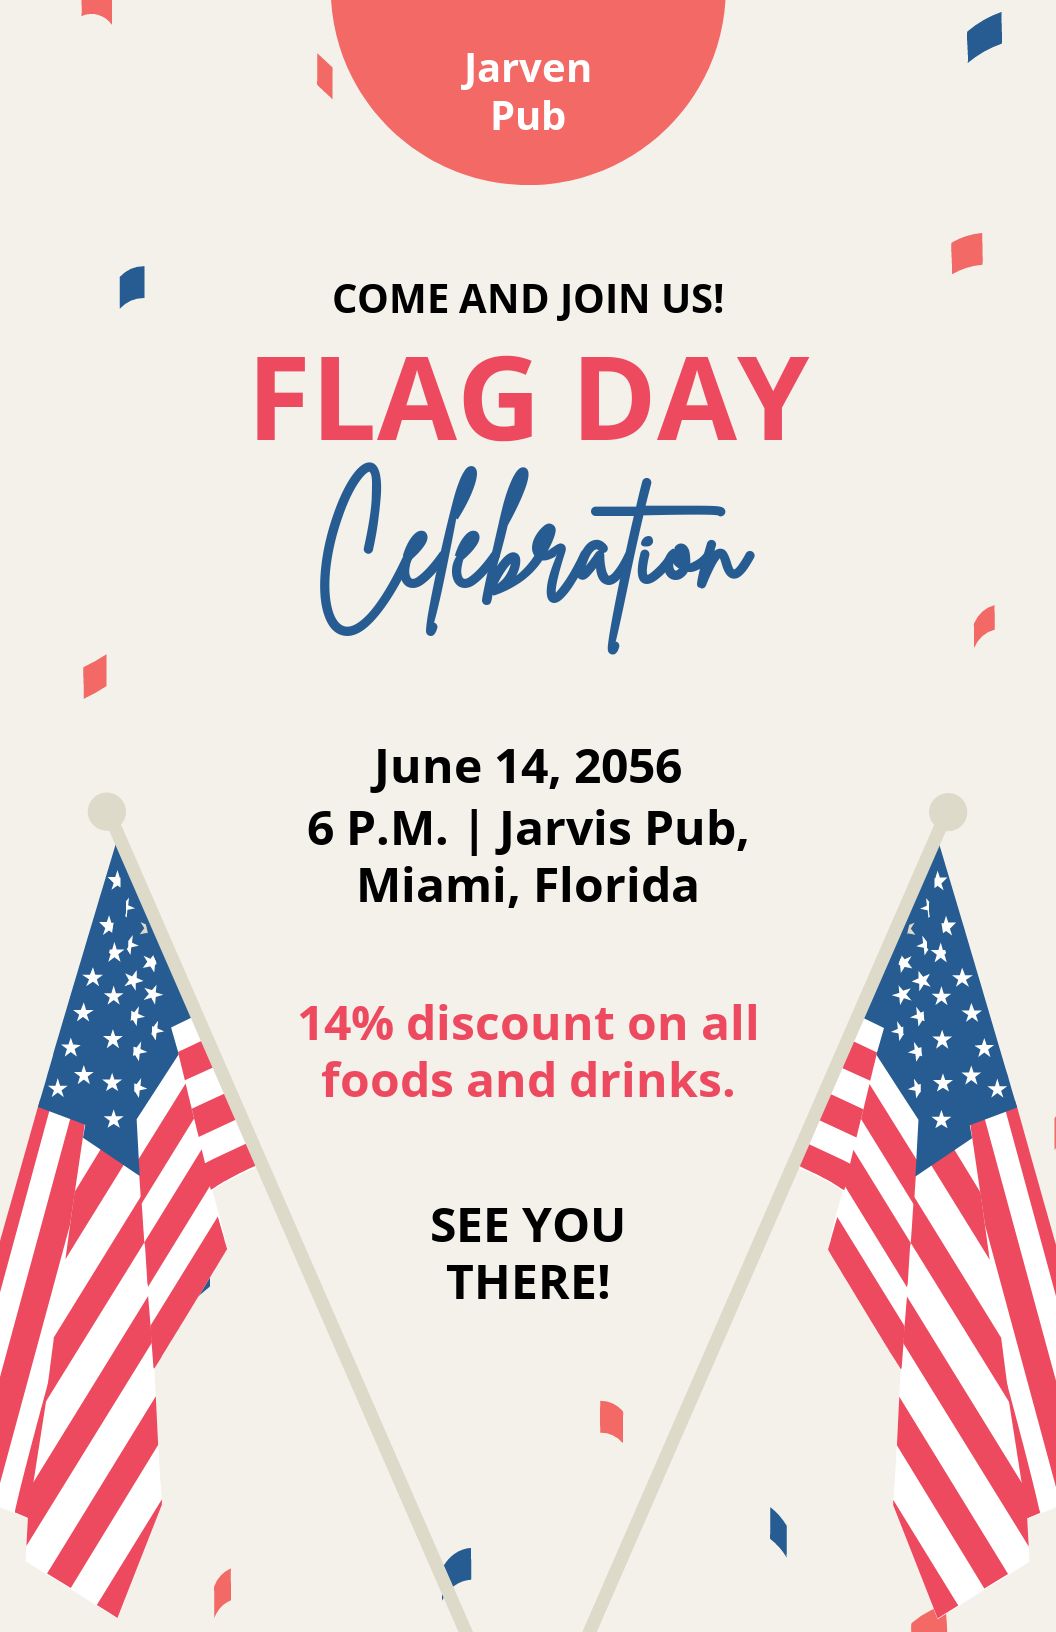 Flag Day Celebration Poster Template in PSD, Illustrator, Word